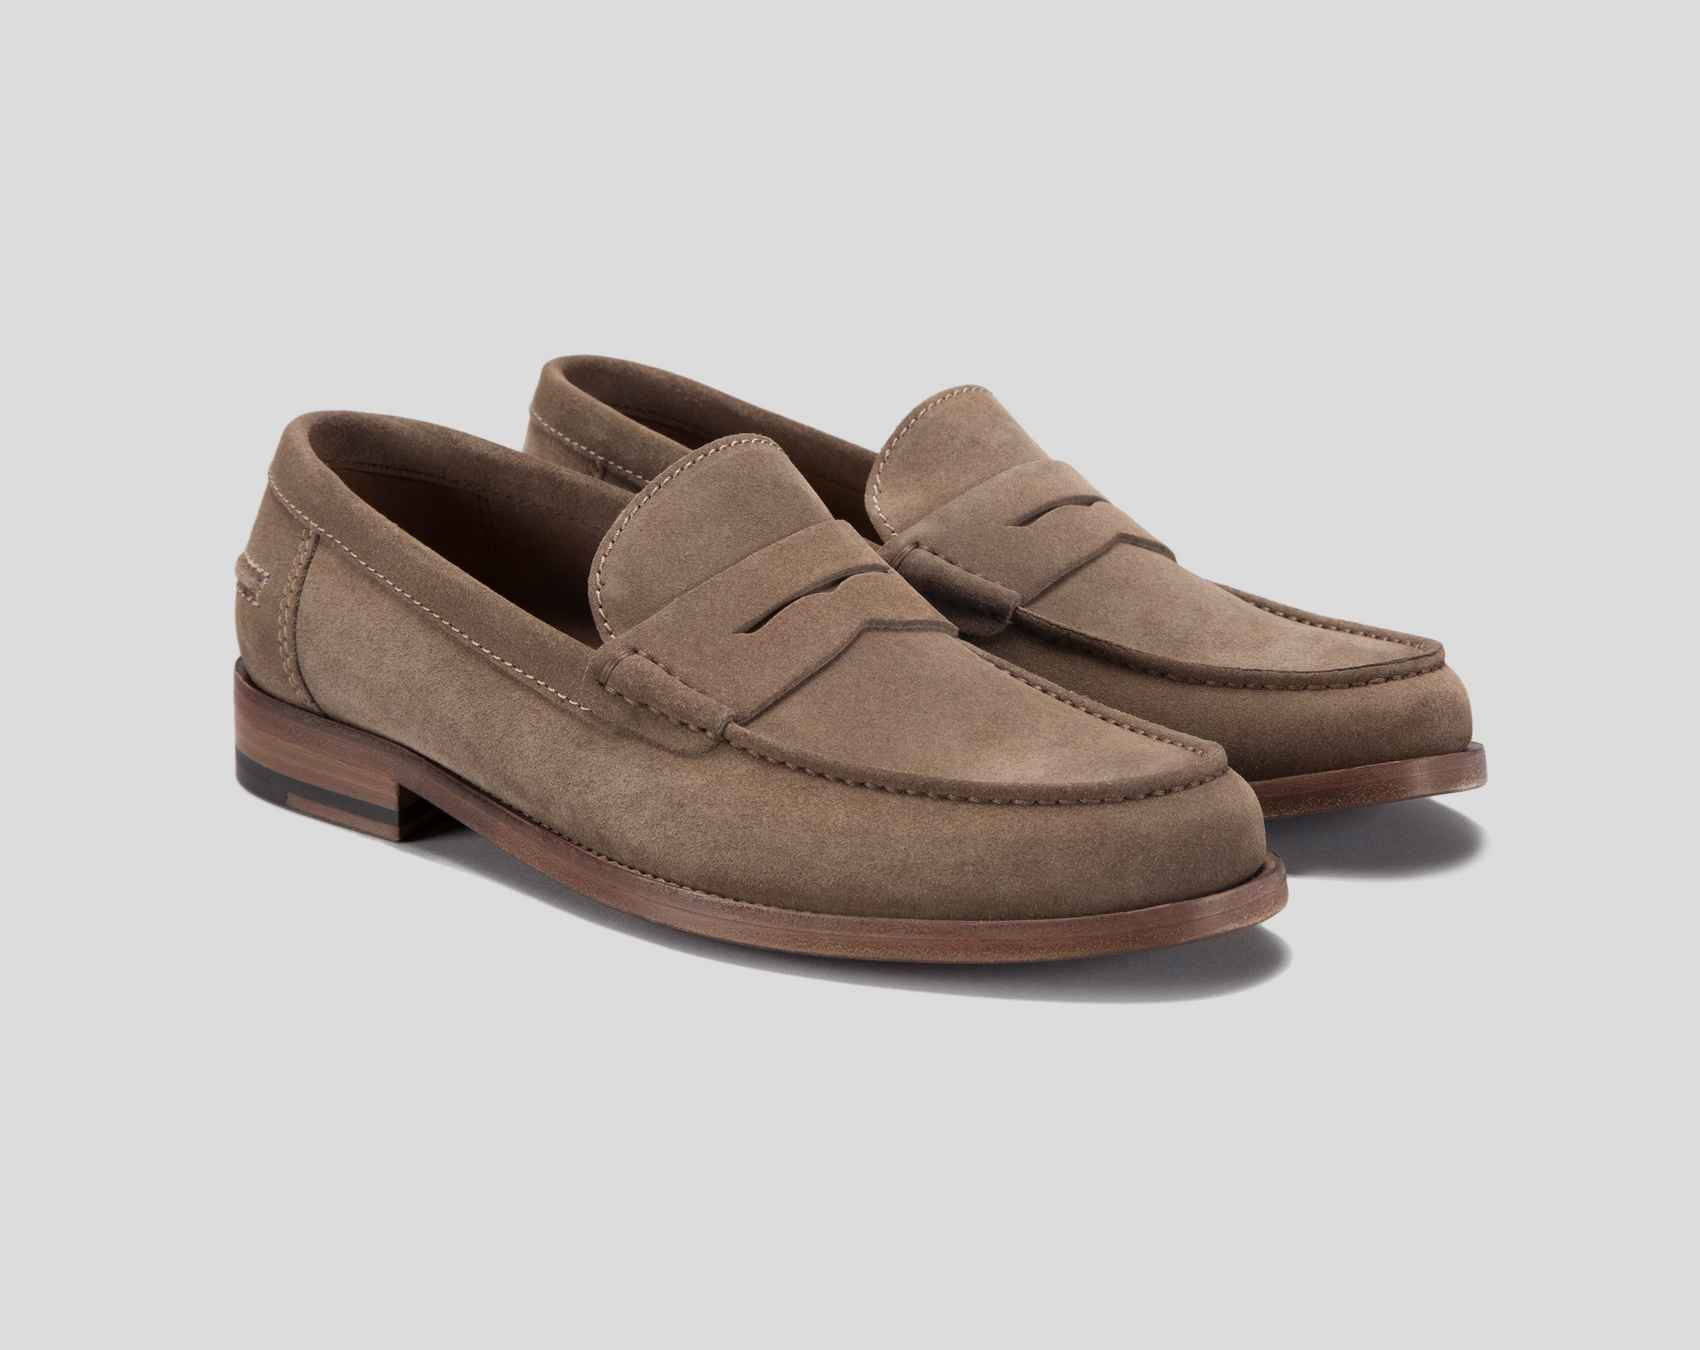 M.Gemi penny loafers